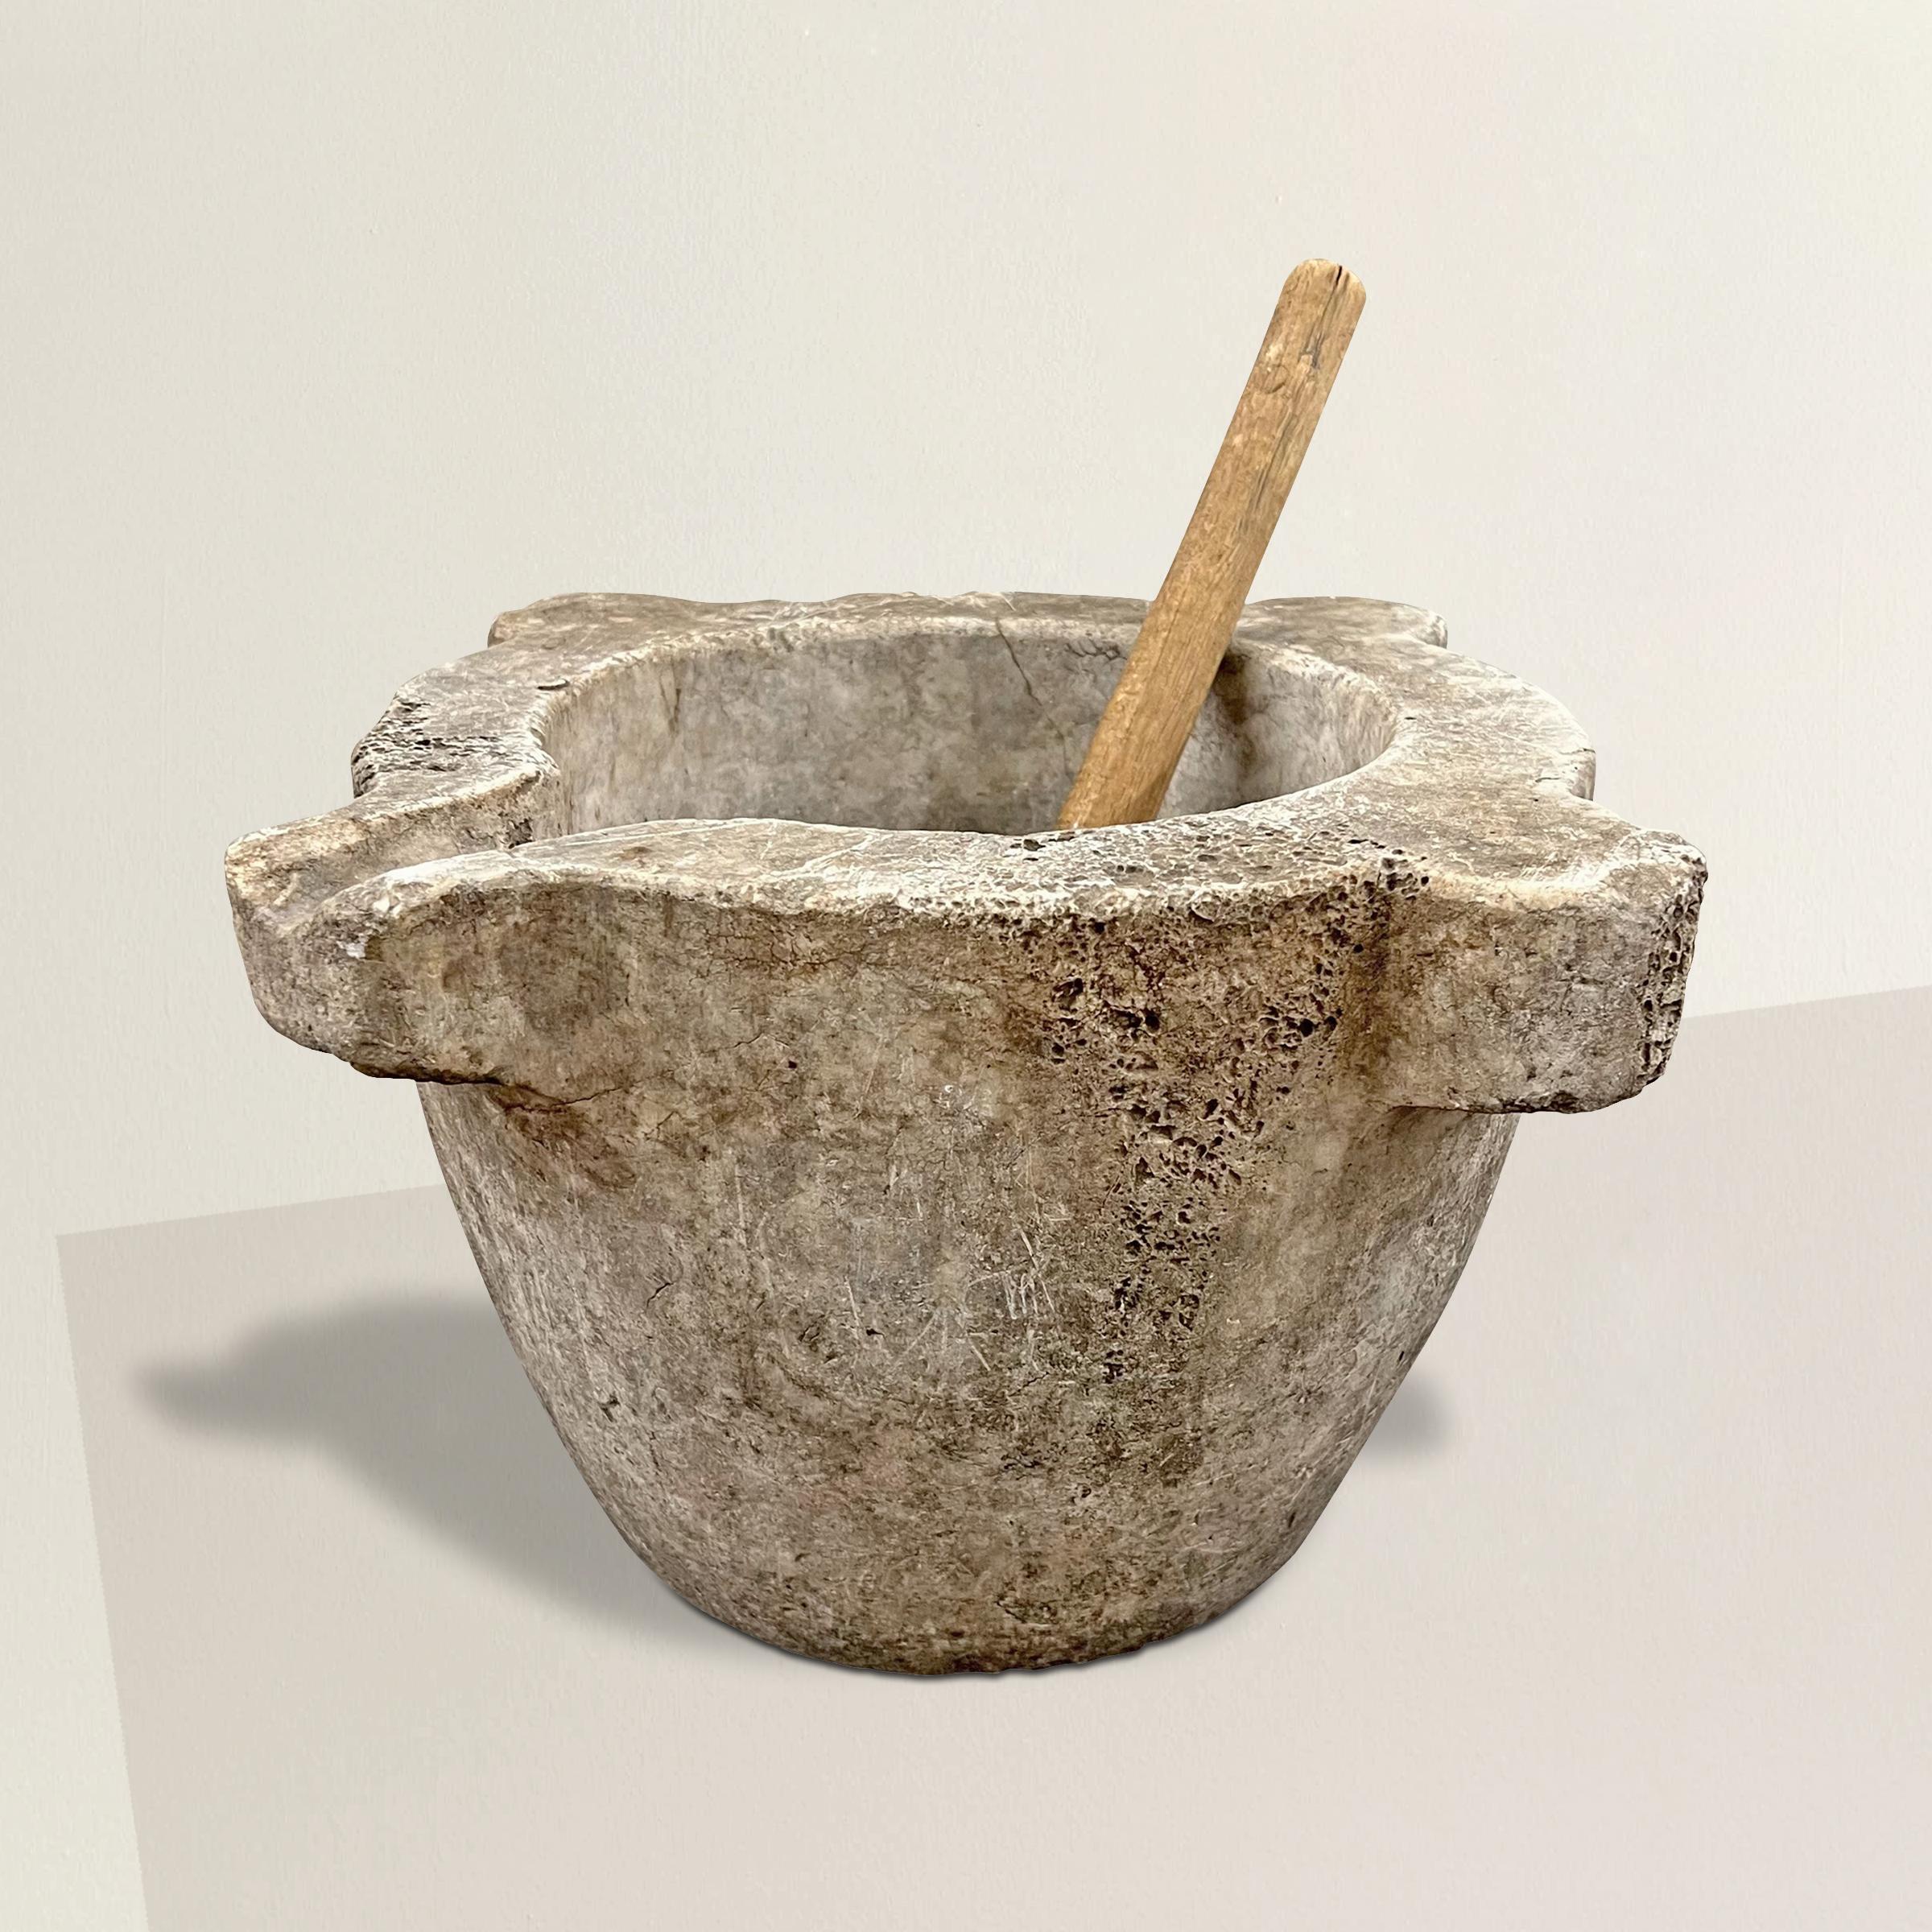 A stunning 18th century French marble mortar with the best worn surface we've seen in years, with a tiger maple pestle. The perfect accessory for your kitchen. Fill with fruits and vegetables on your island, or put it to use at the end of summer